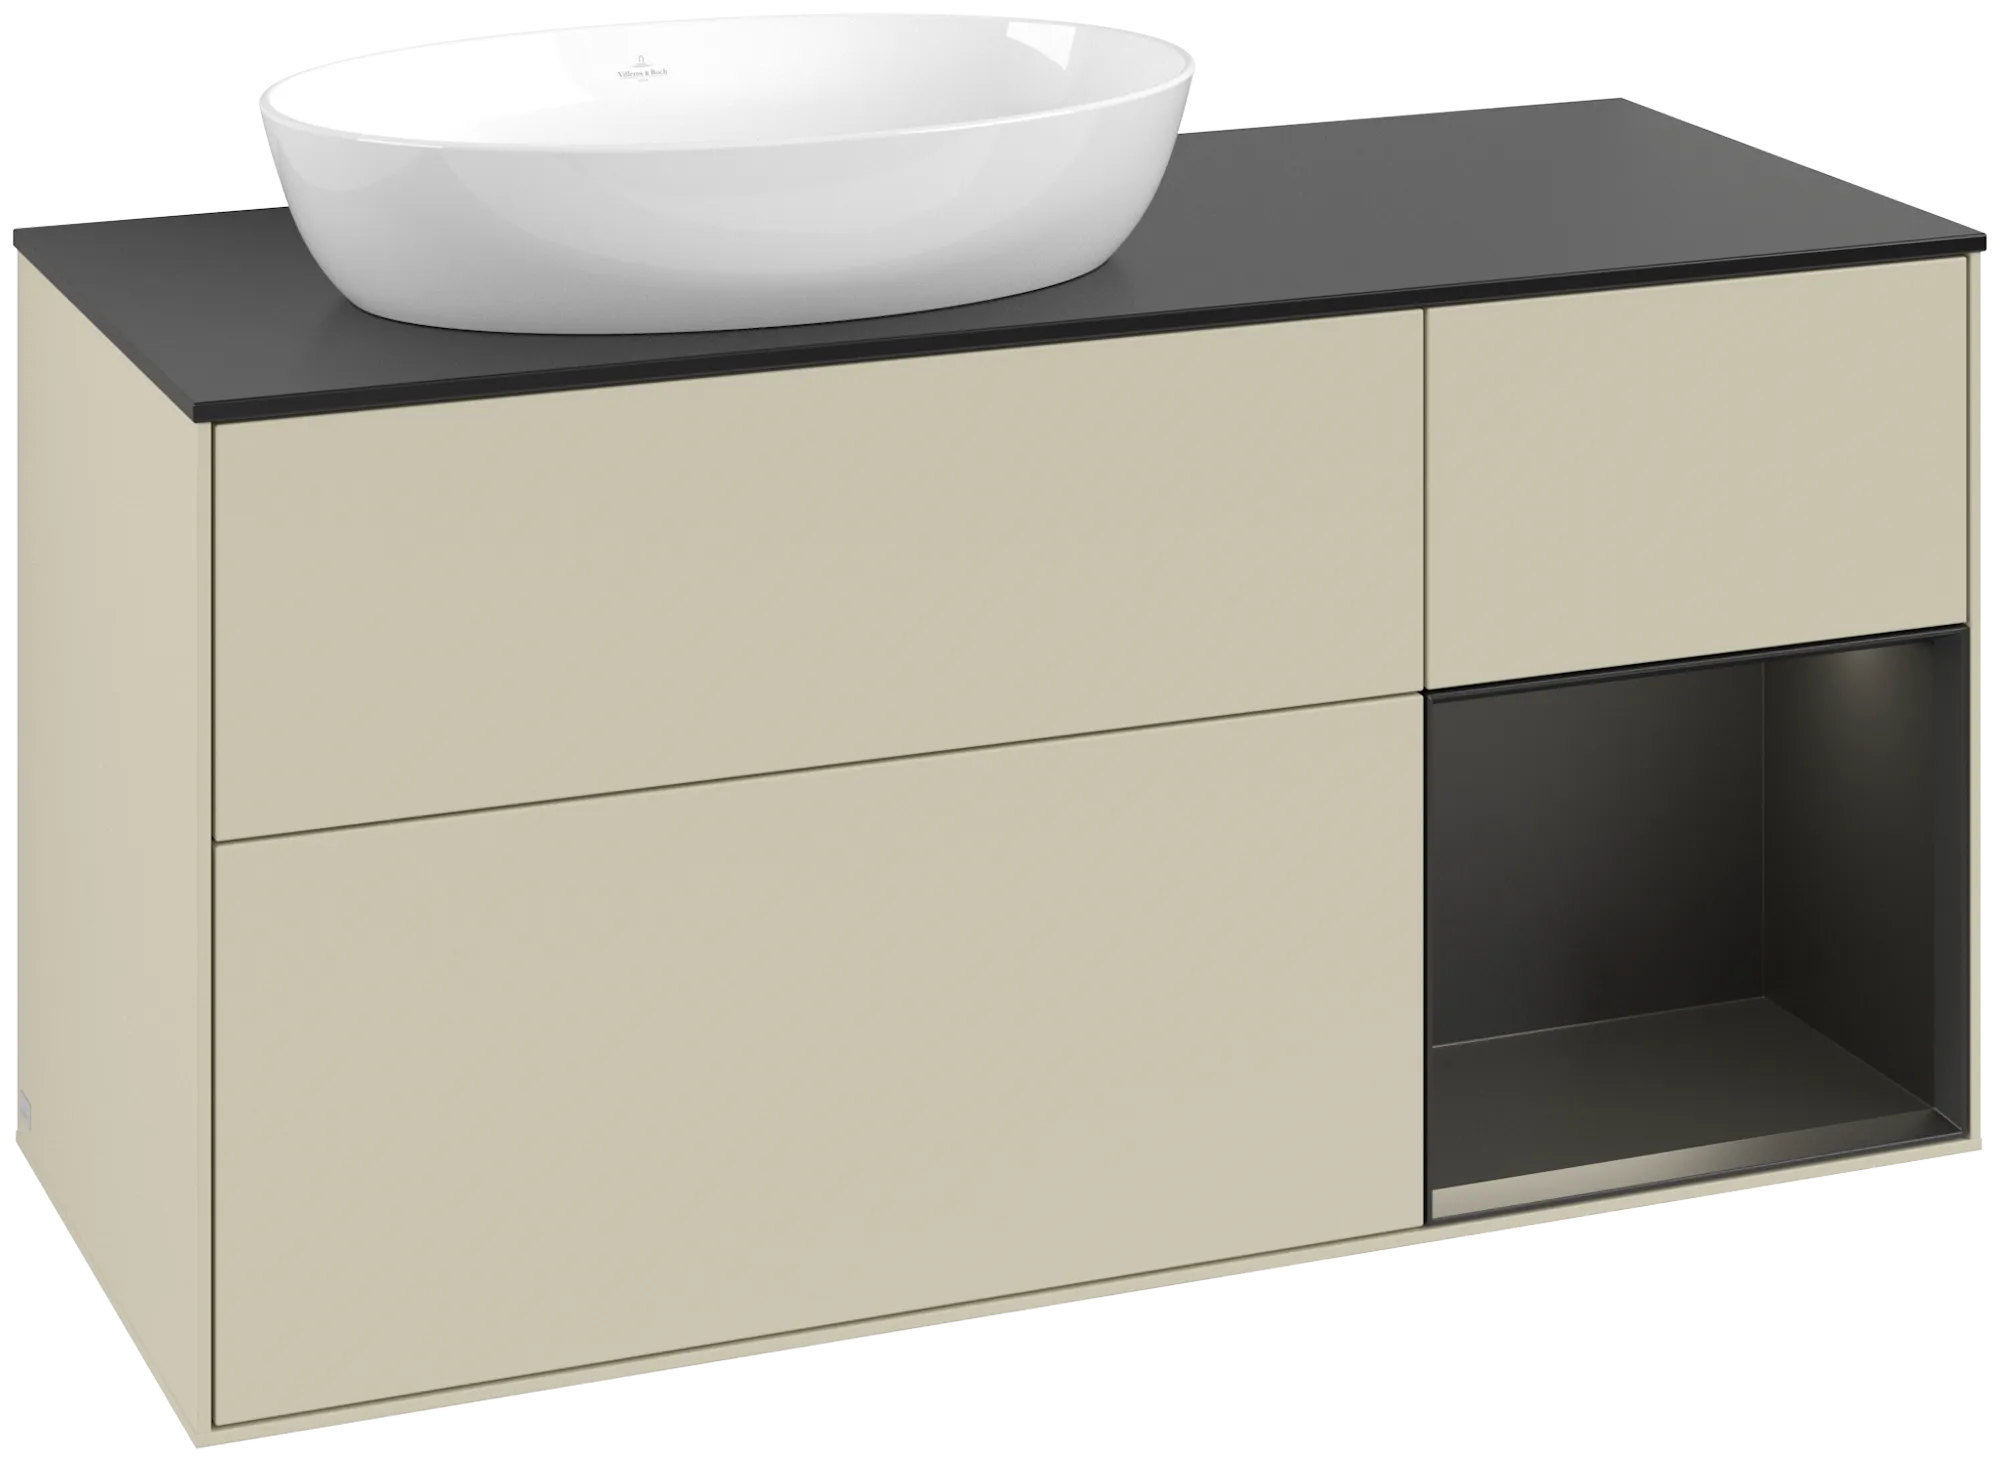 Picture of VILLEROY BOCH Finion Vanity unit, with lighting, 3 pull-out compartments, 1200 x 603 x 501 mm, Silk Grey Matt Lacquer / Black Matt Lacquer / Glass Black Matt #FA52PDHJ